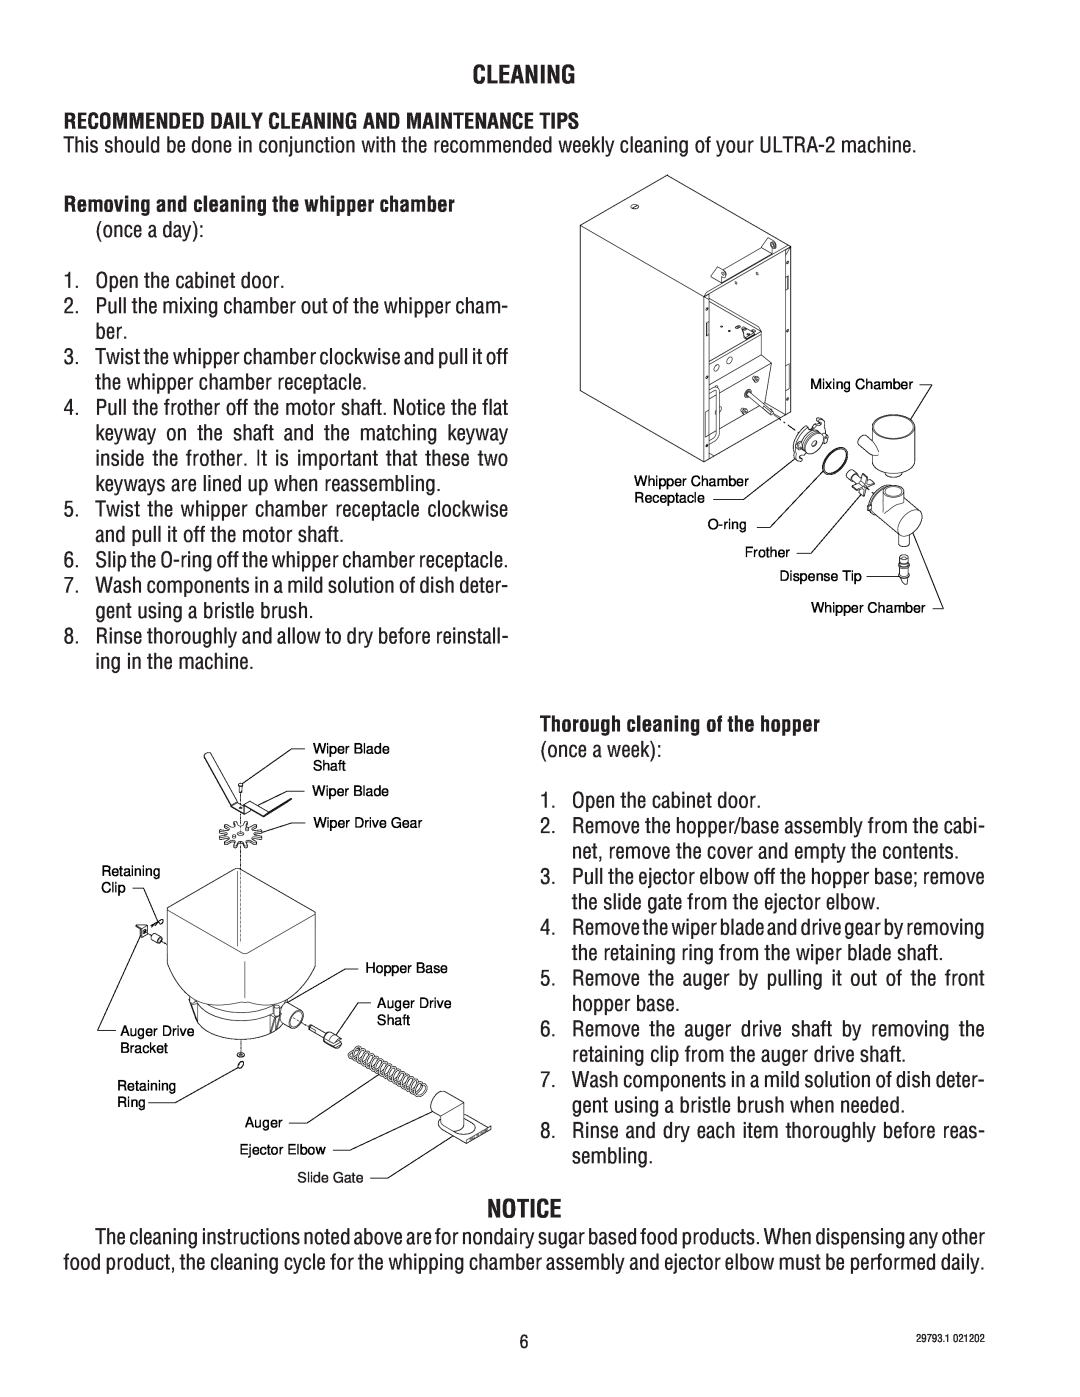 Bunn dispenser service manual Recommended Daily Cleaning And Maintenance Tips 